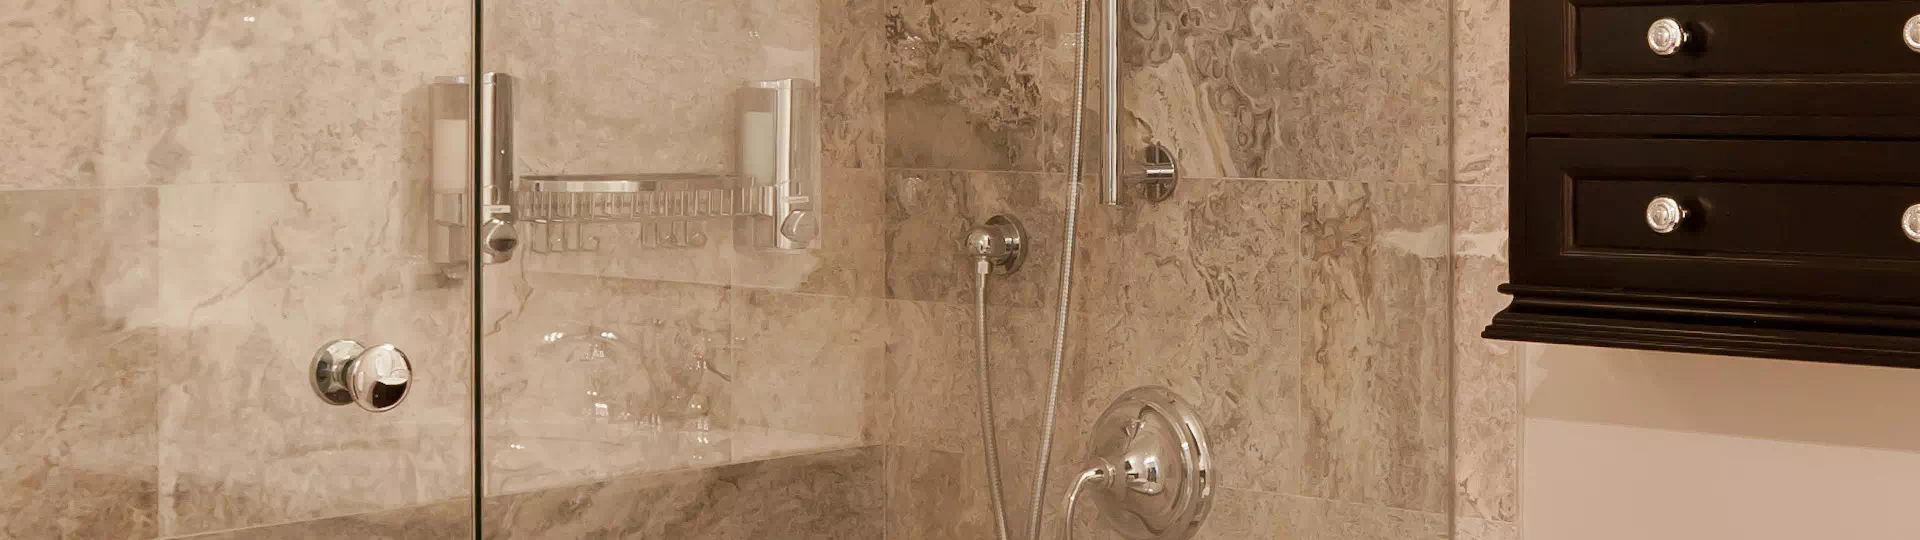 How To Clean Natural Stone Shower, What To Use Clean Stone Tile Shower